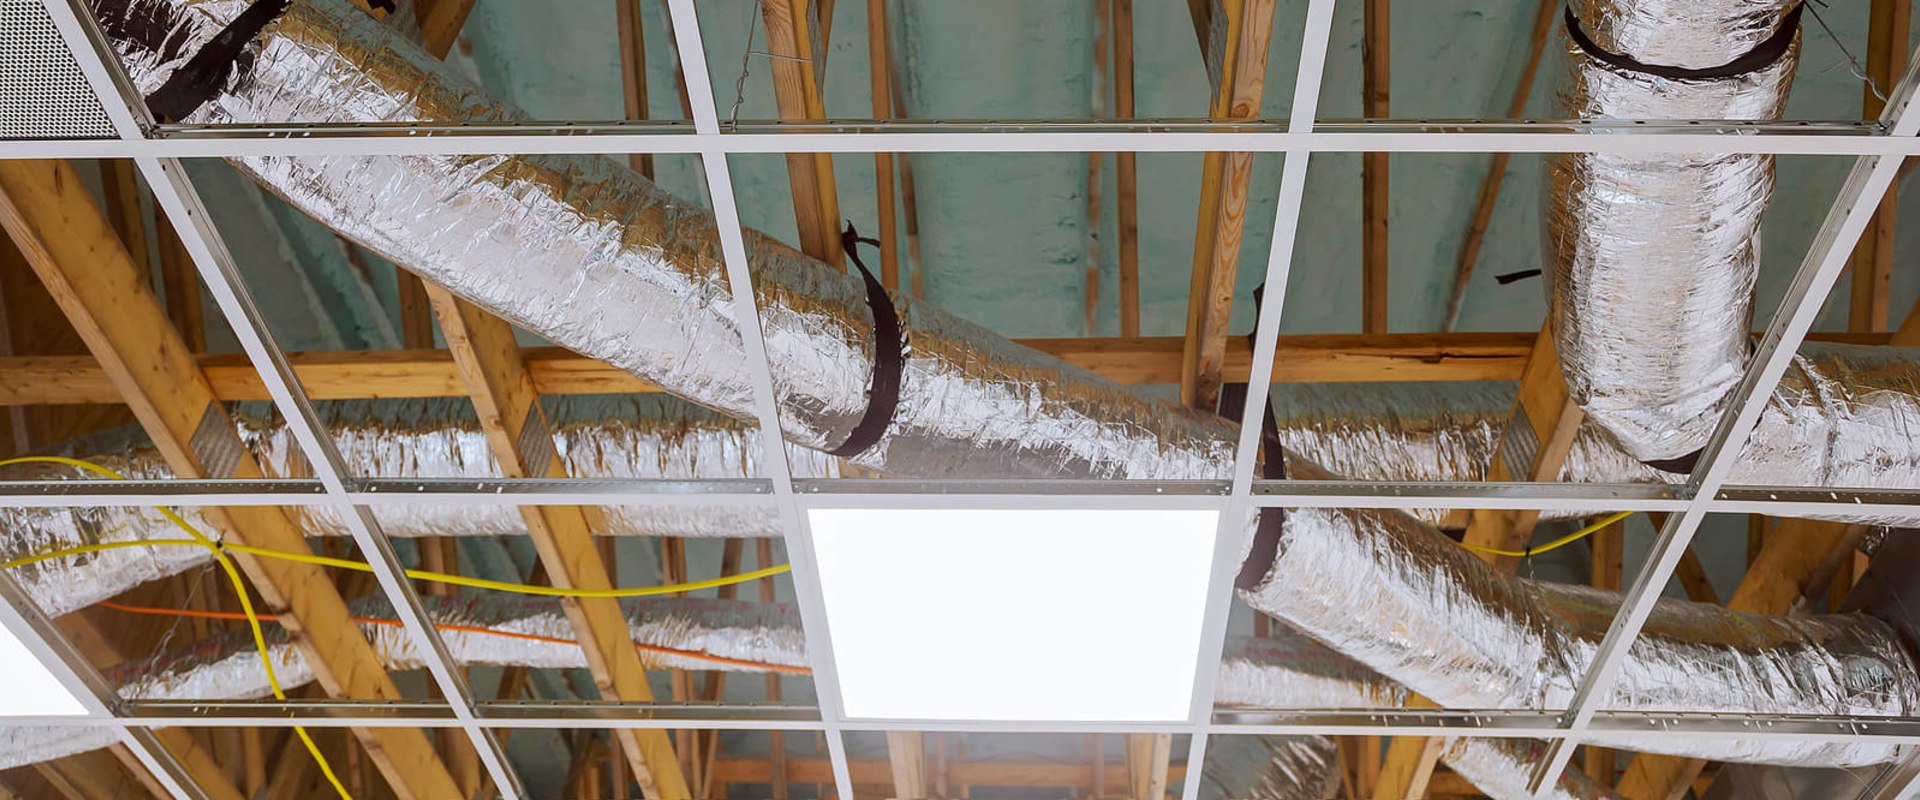 How Long Does it Take to Install an HVAC System with Ductwork?